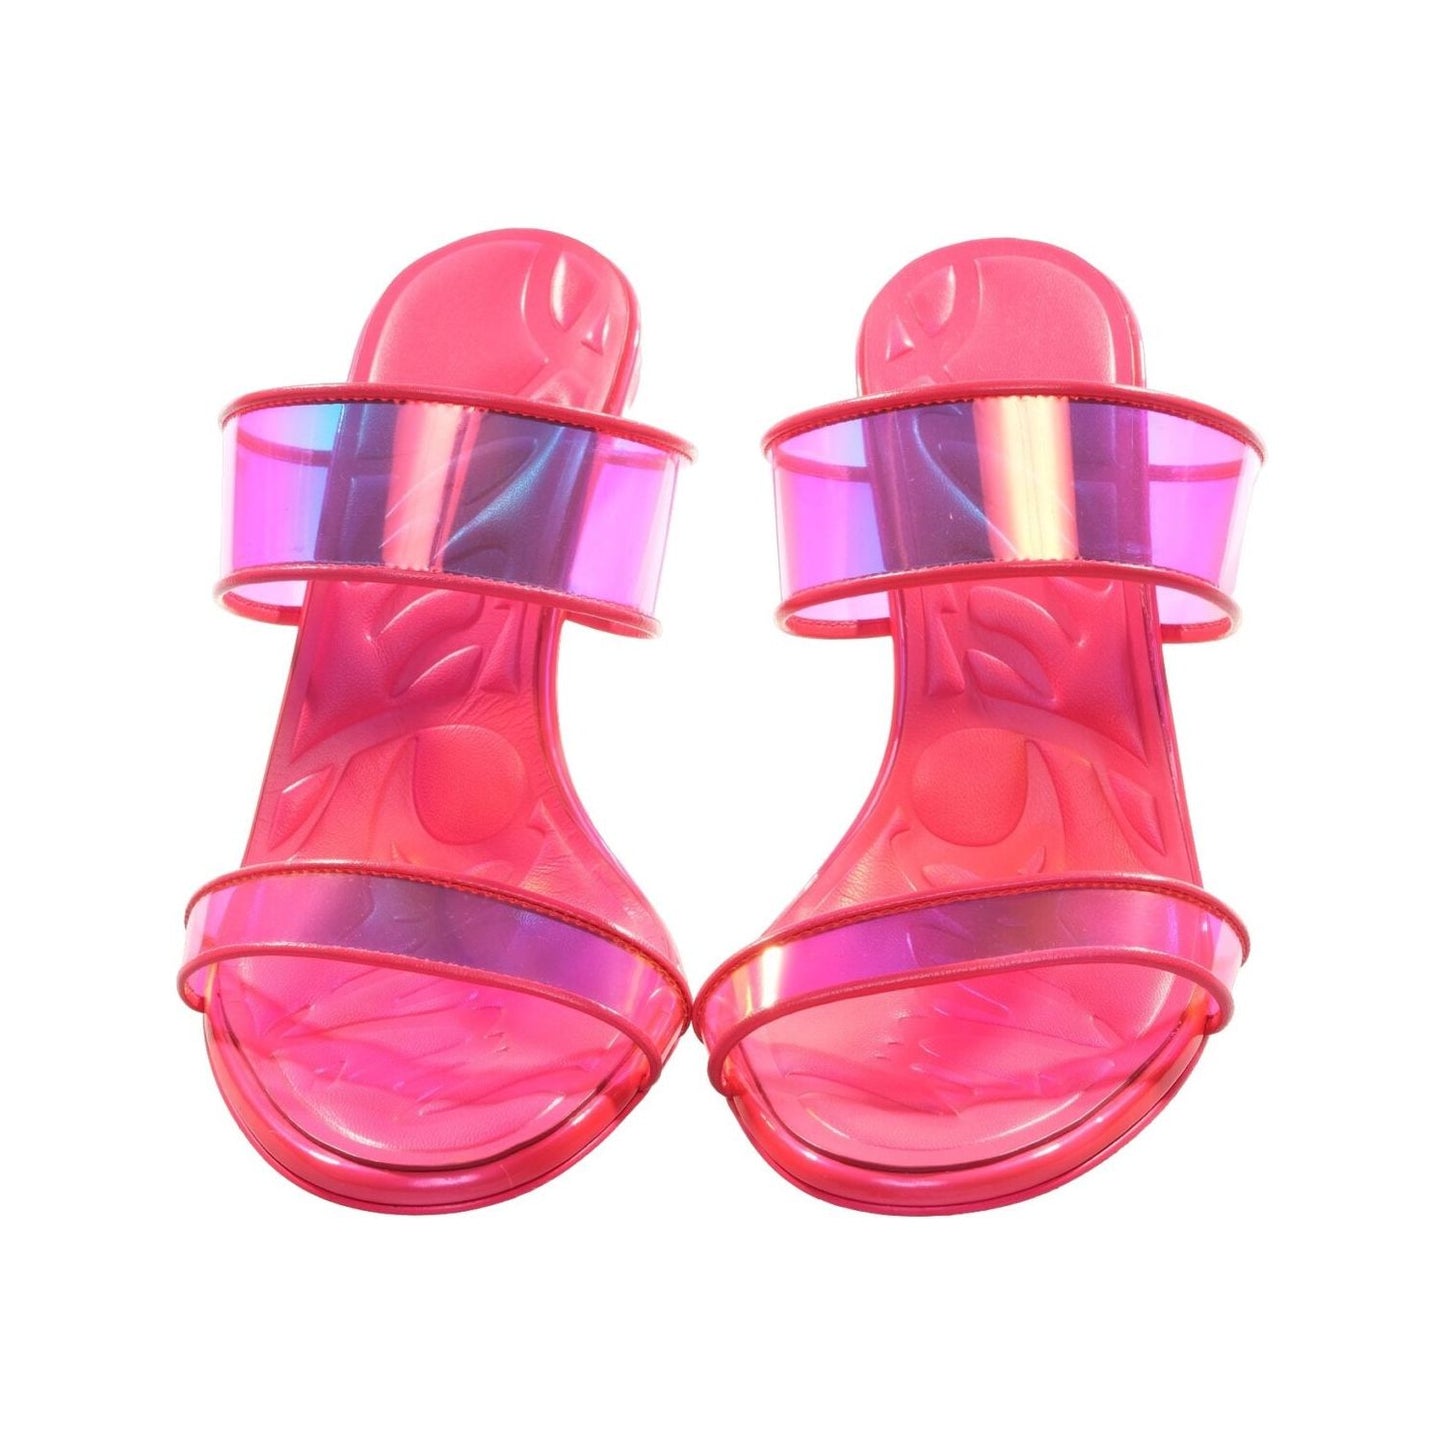 Just Loubi 85 Neon Fluoro Hot Pink Strappy High Heel Mules